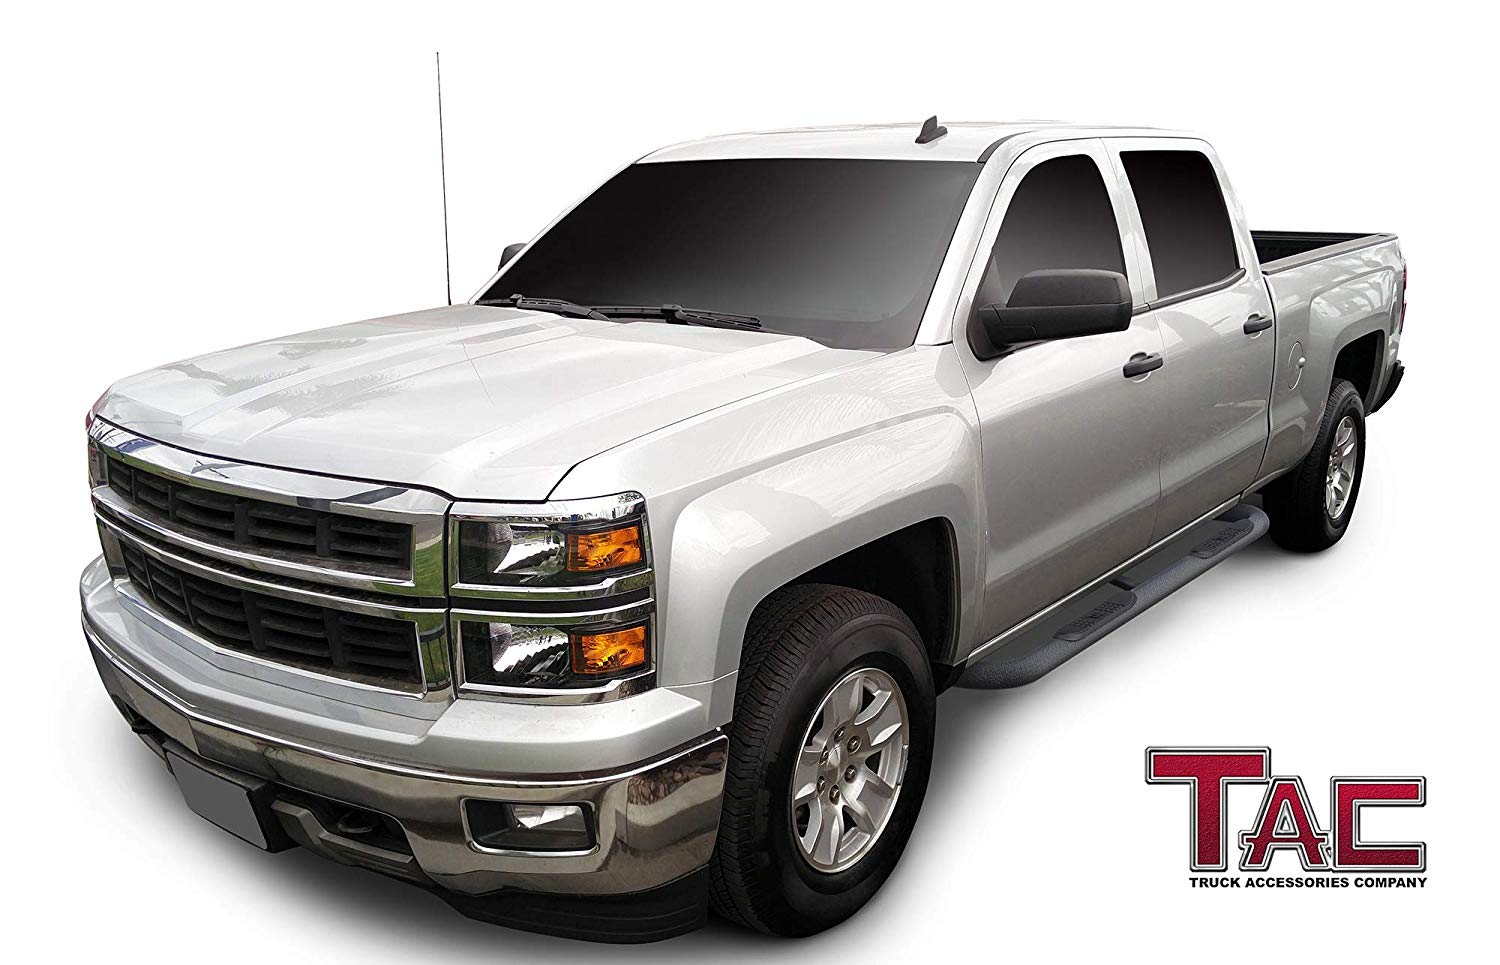 TAC Heavy Texture Black 3" Side Steps For Chevy Silverado/GMC Sierra 2001-2018 1500 Models & 2001-2019 2500/3500 Models Crew Cab (Excl. C/K Classic) Truck | Running Boards | Nerf Bars | Side Bars - 0